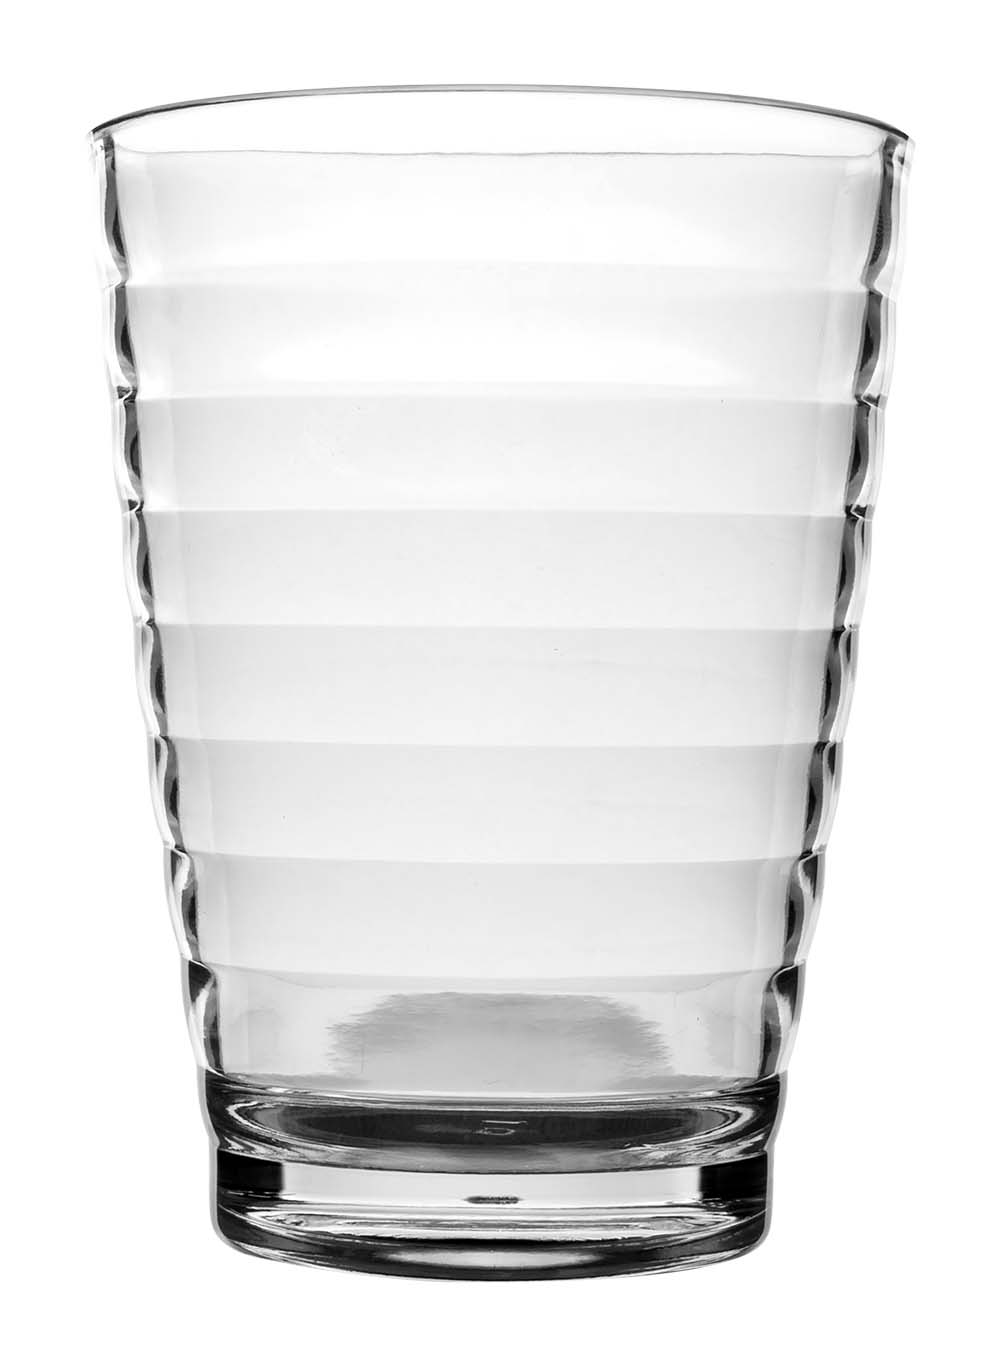 6101496 An extra sturdy and luxurious lemonade glass. Made of 100% polycarbonate This makes the glasses almost unbreakable, light weight and scratch proof. This glass is also dishwasher safe.